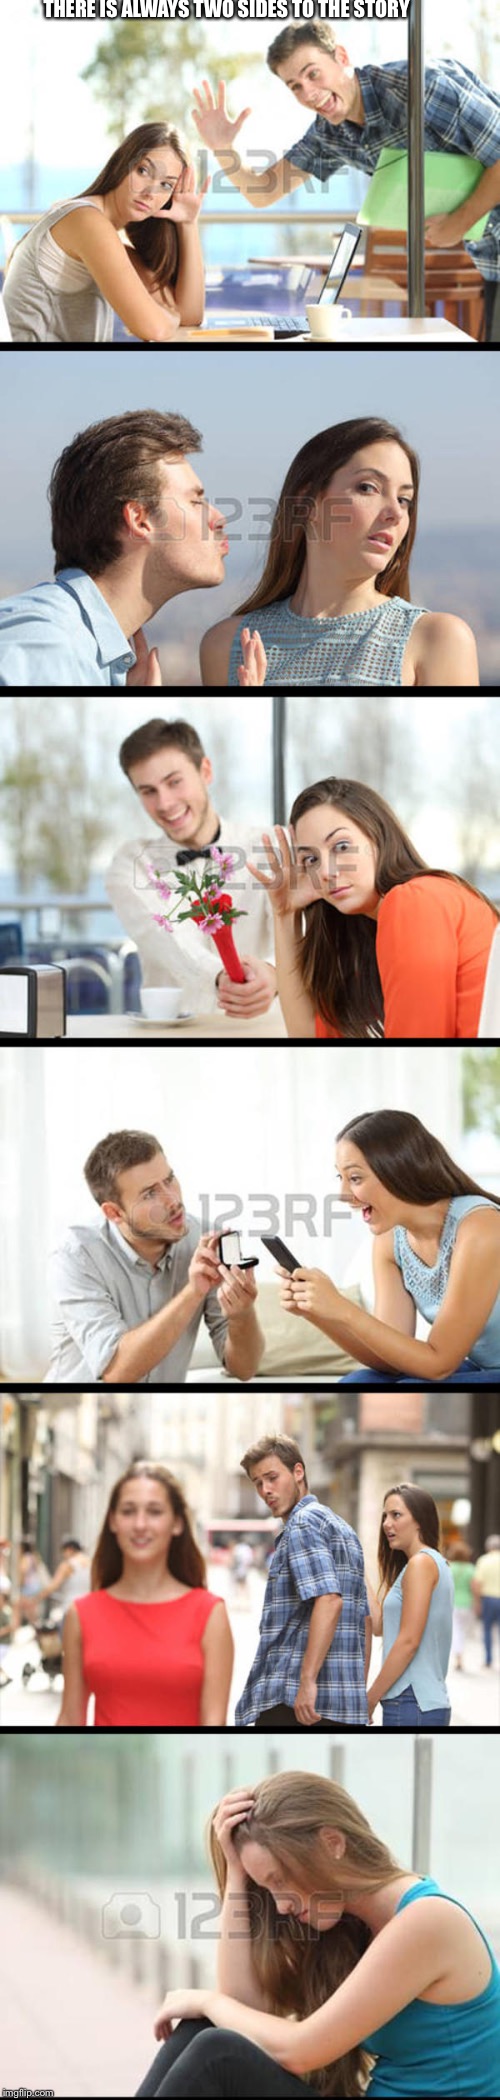 THERE IS ALWAYS TWO SIDES TO THE STORY | image tagged in distracted boyfriend | made w/ Imgflip meme maker